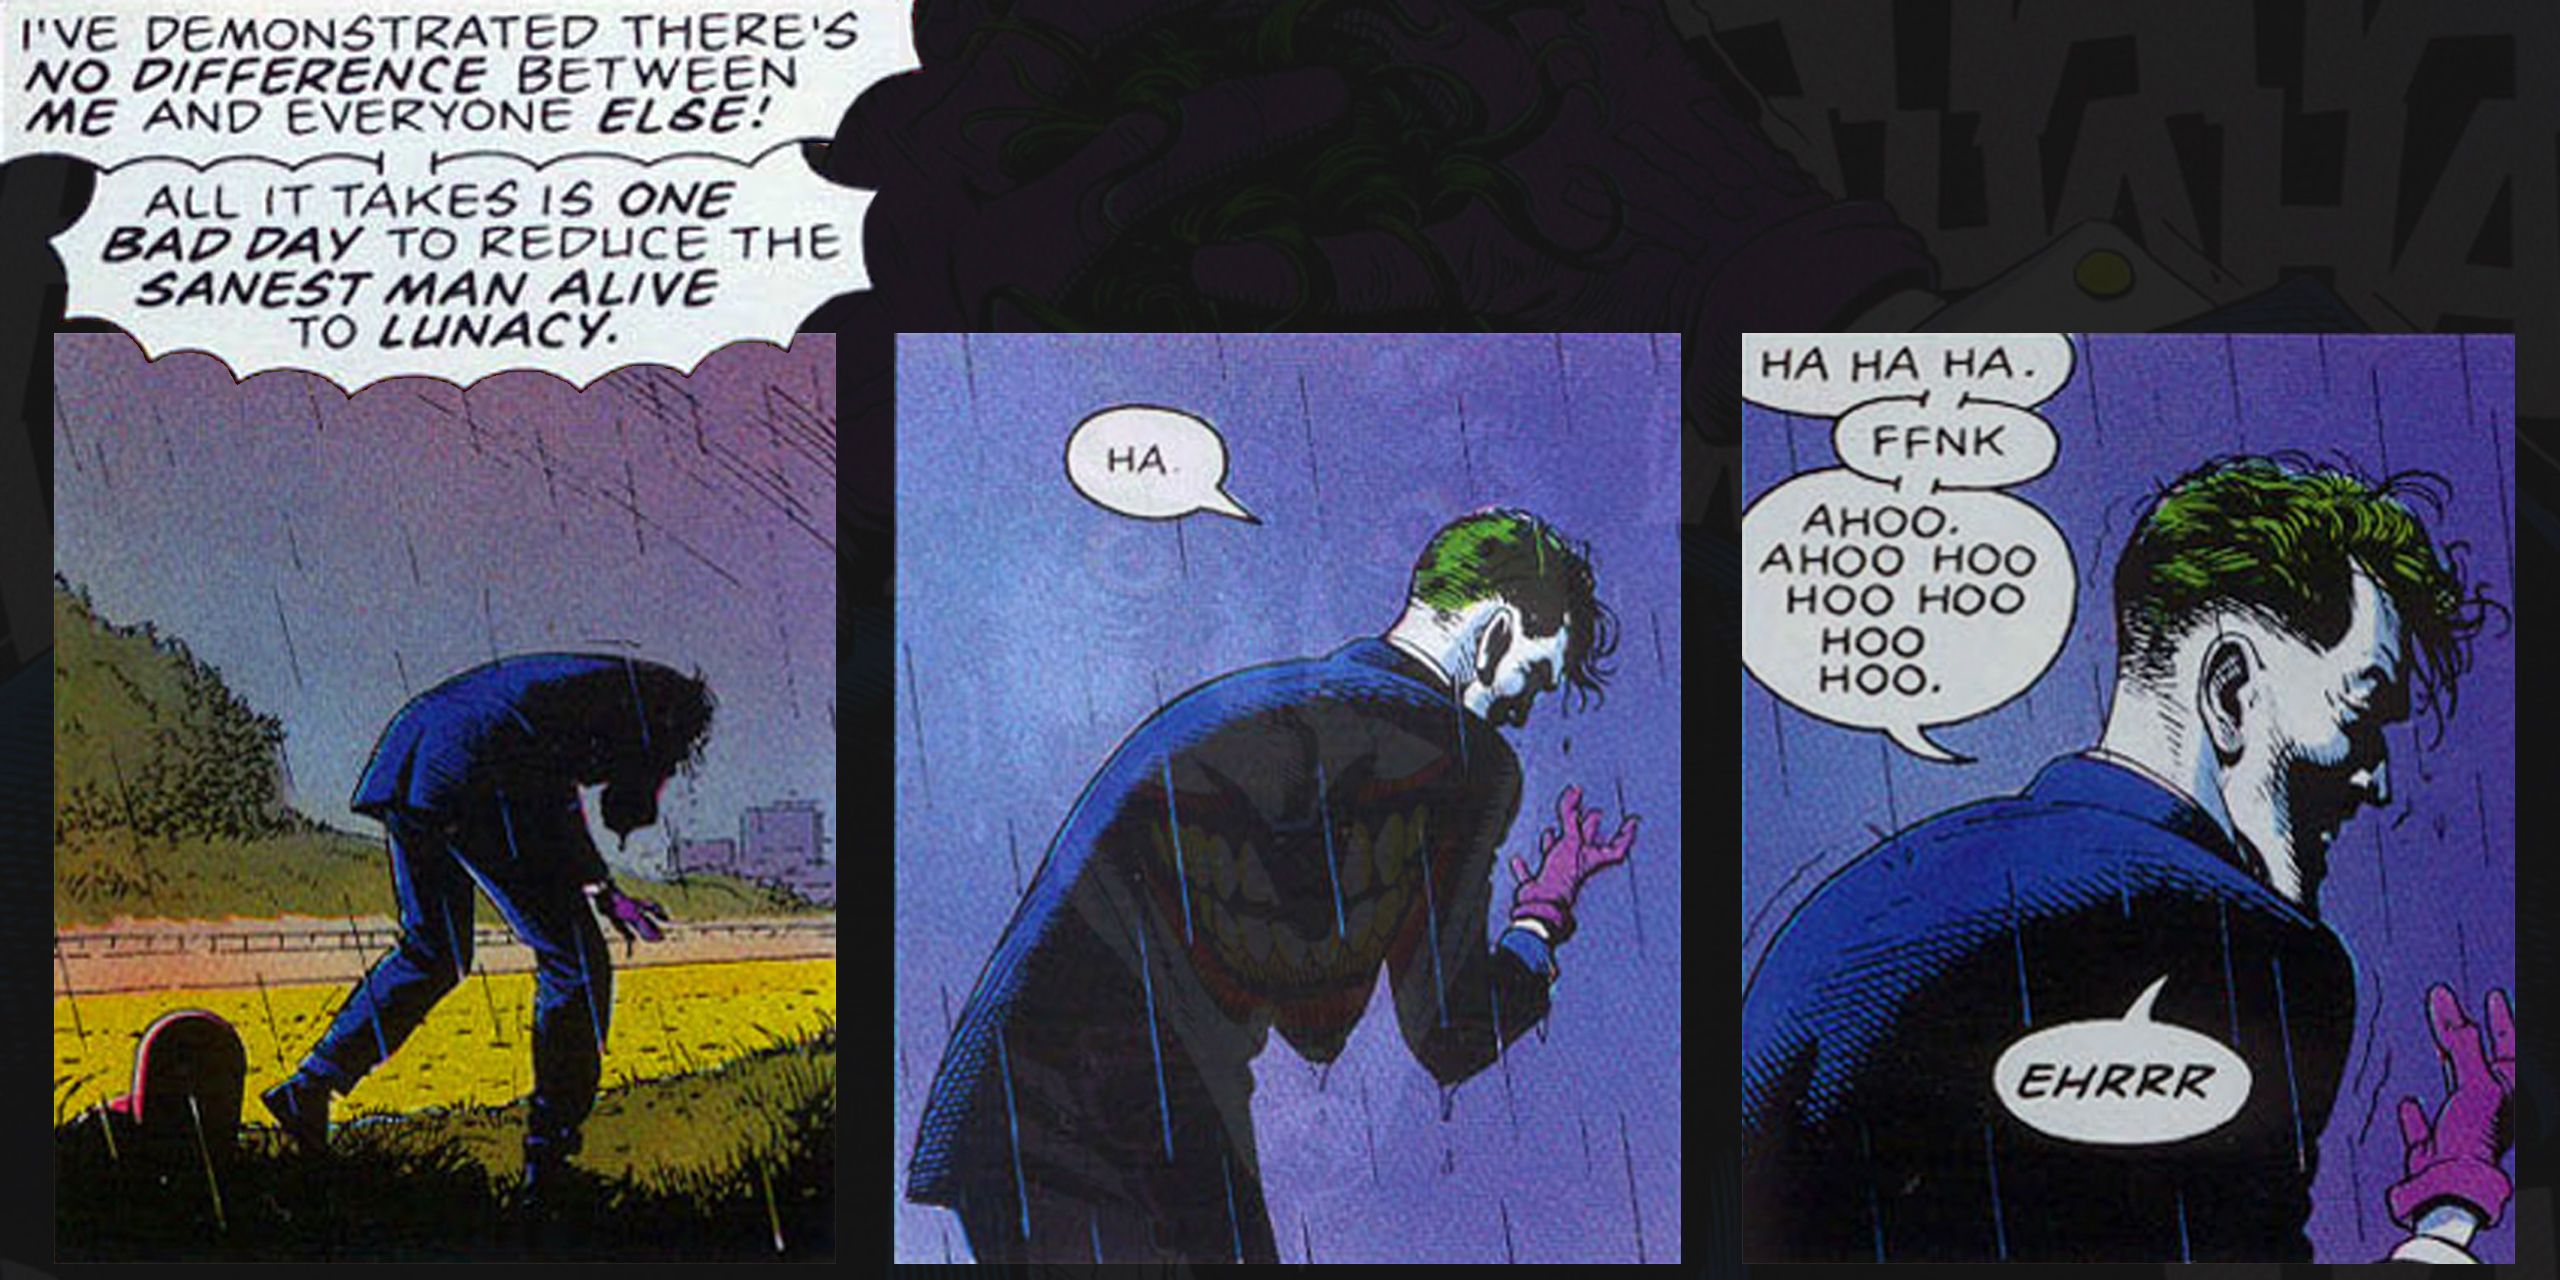 The Killing Joke &quot;One Bad Day&quot; quote